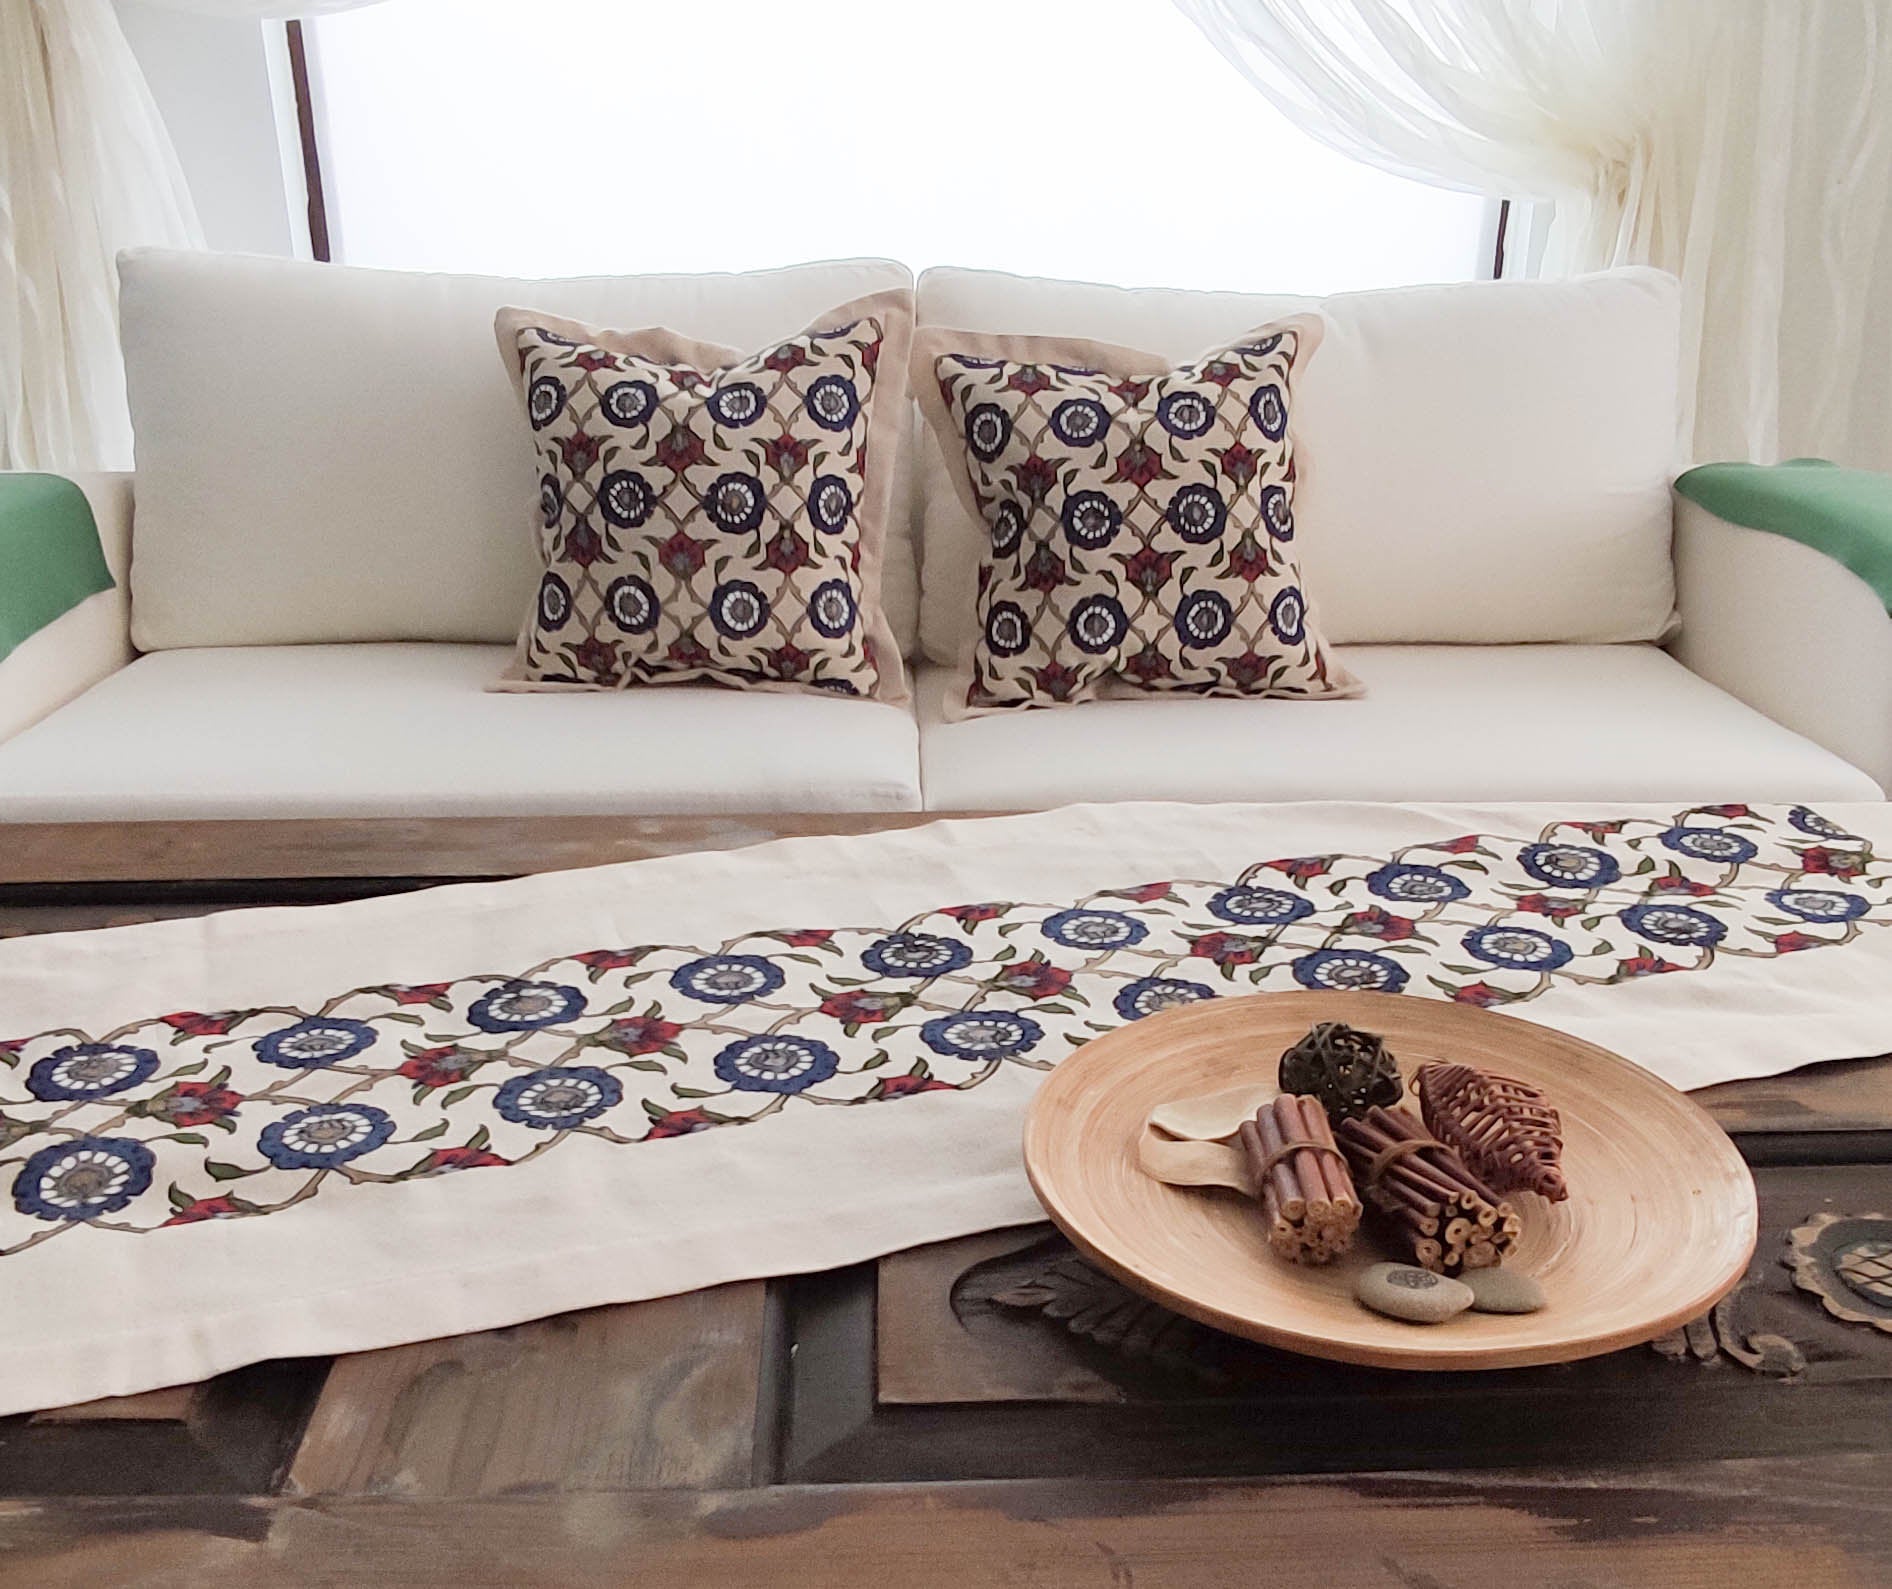 From everyday dining to casual get-together, make a statement with this adorable table runners and pillow case set.